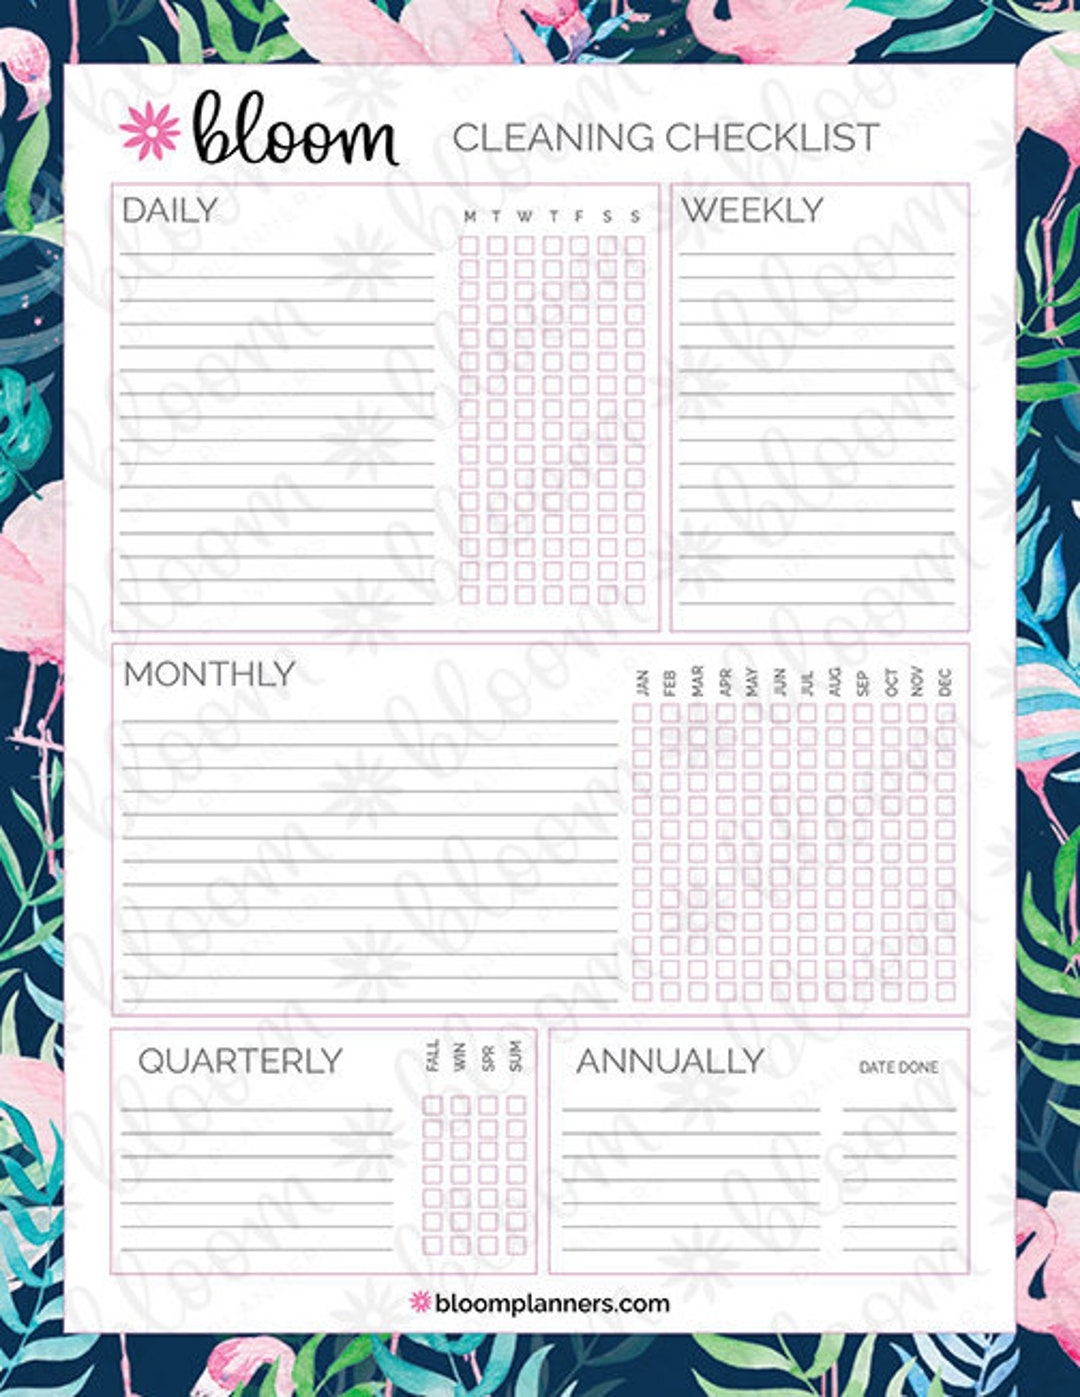 Cleaning Schedule Checklist Printable PDF Track Daily Weekly Monthly Quarterly And Annual Cleaning Tasks Instant Download Etsy